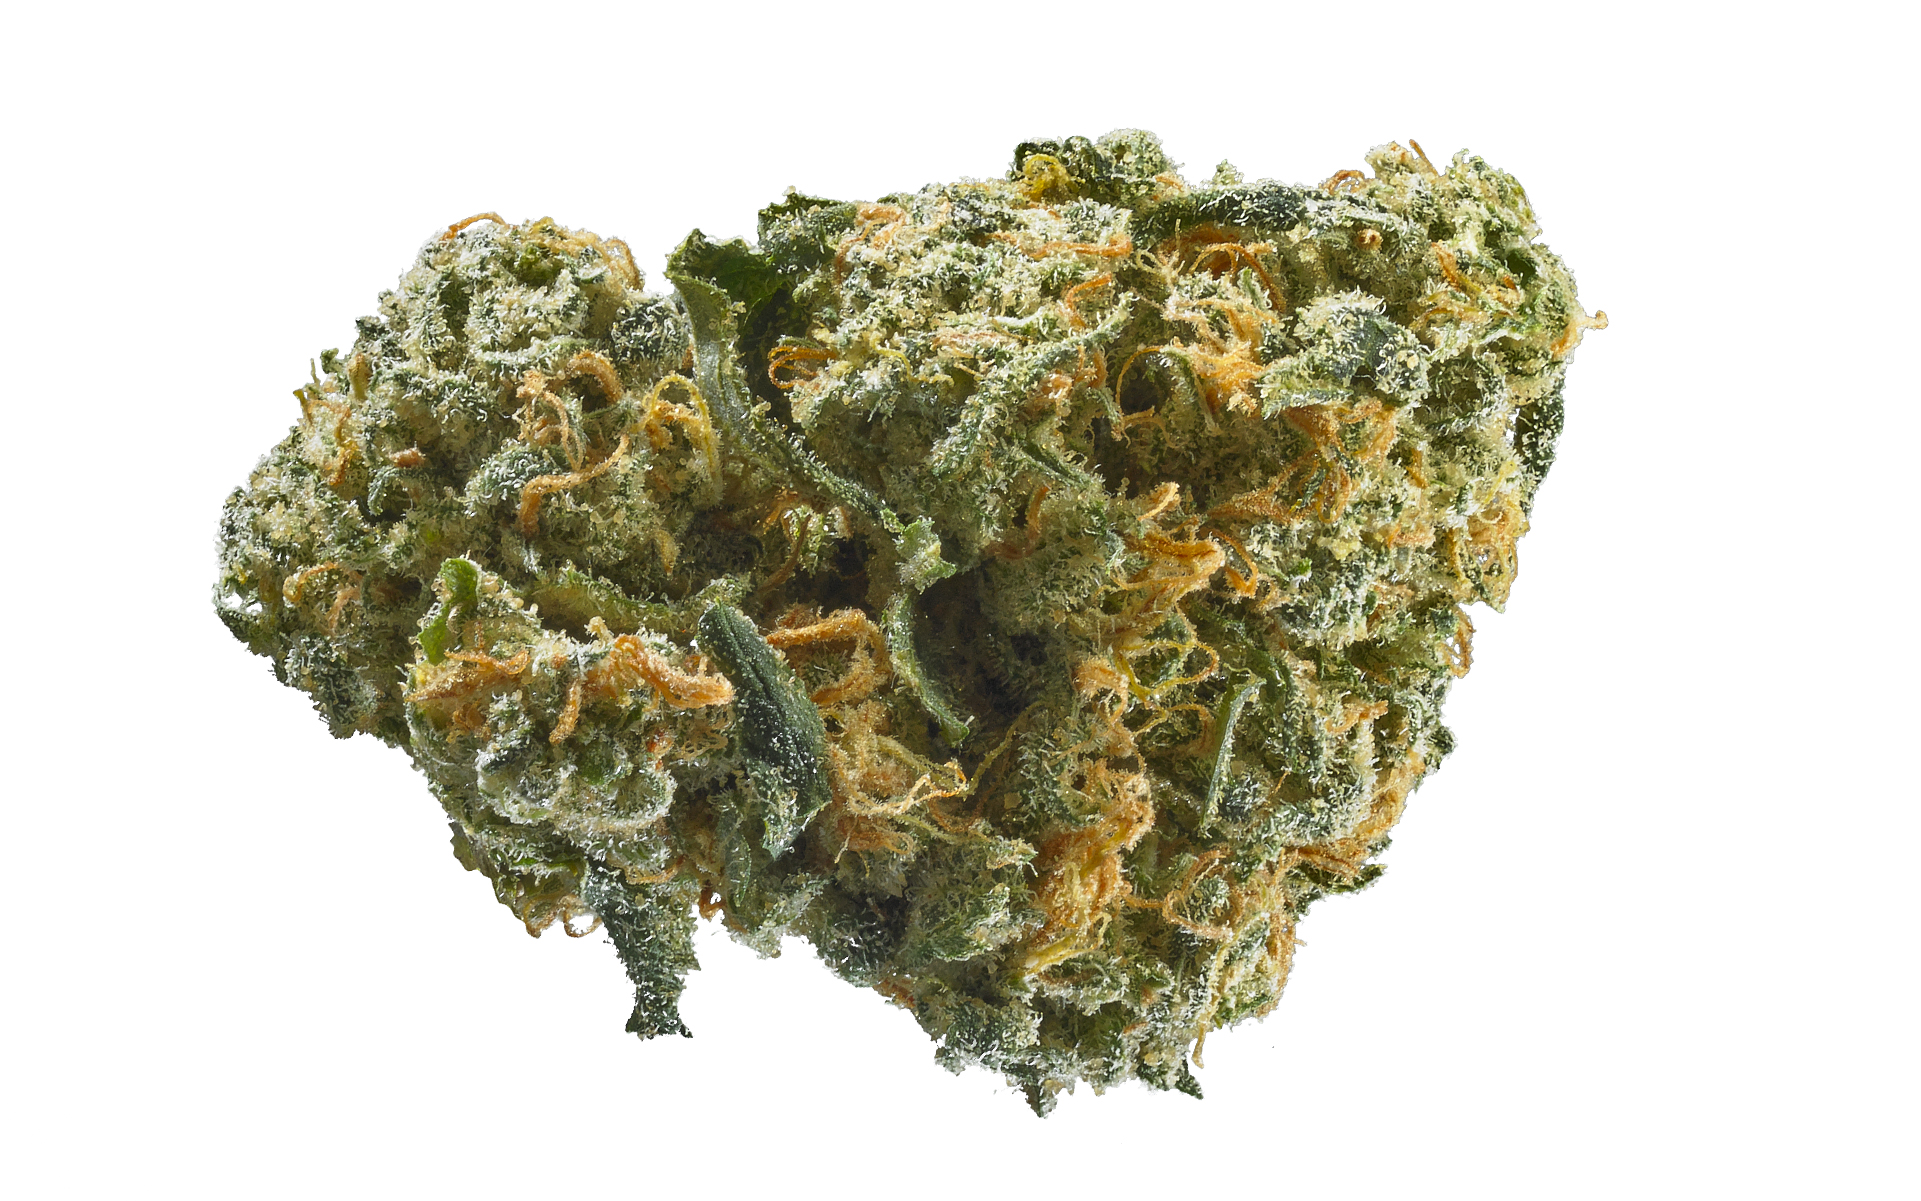 AK-47 Weed is helpful to those suffering from bipolar disorder, depression and other mood disorders. Others use this strain to relax and regulate their mood